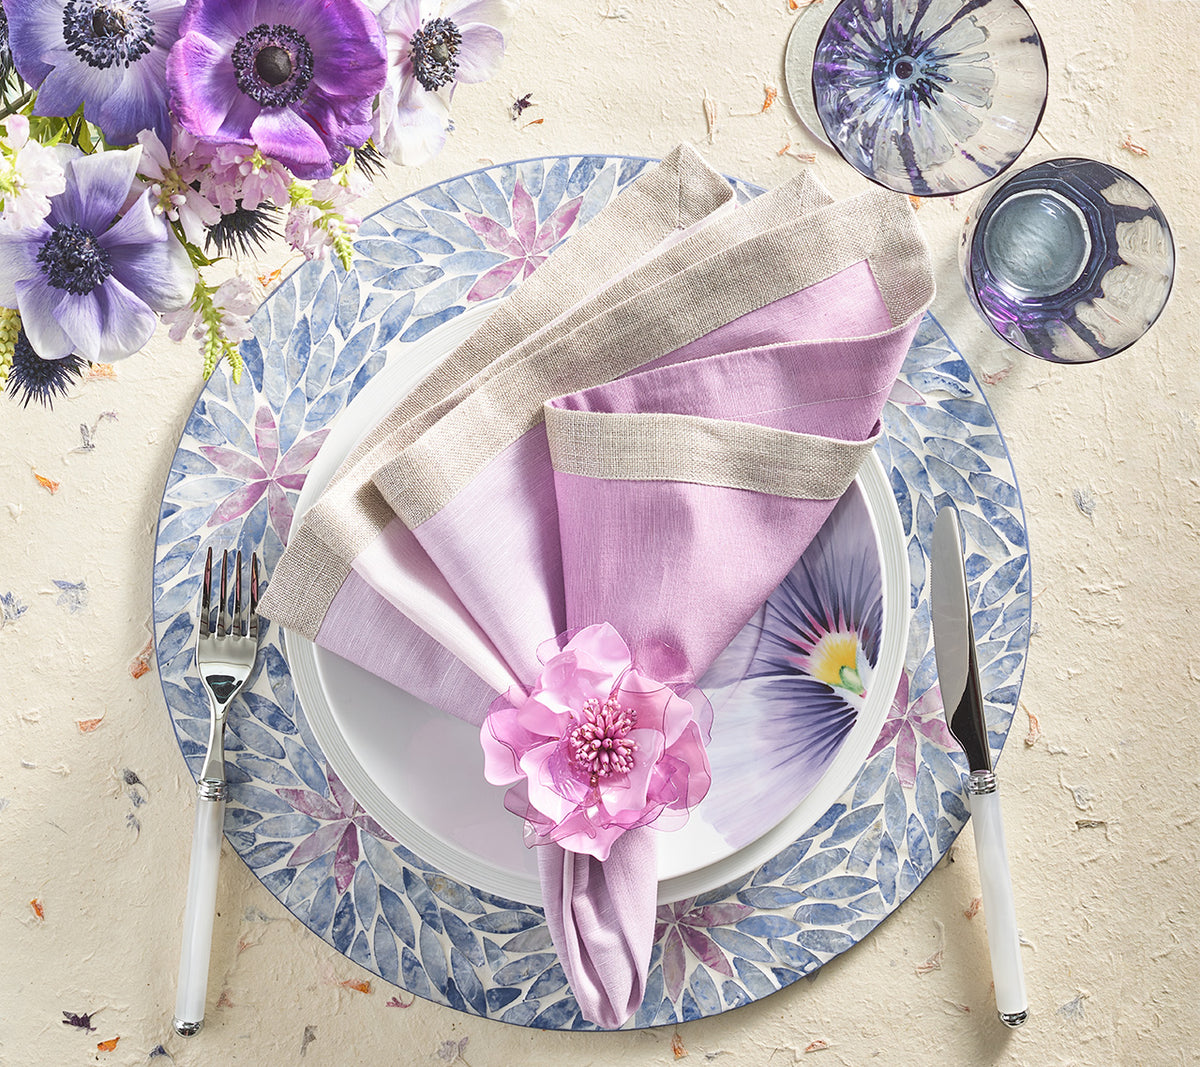 Lilac Gardenia Napkin Ring fashioned after the flower of the same name, which sits on a beaded ring base